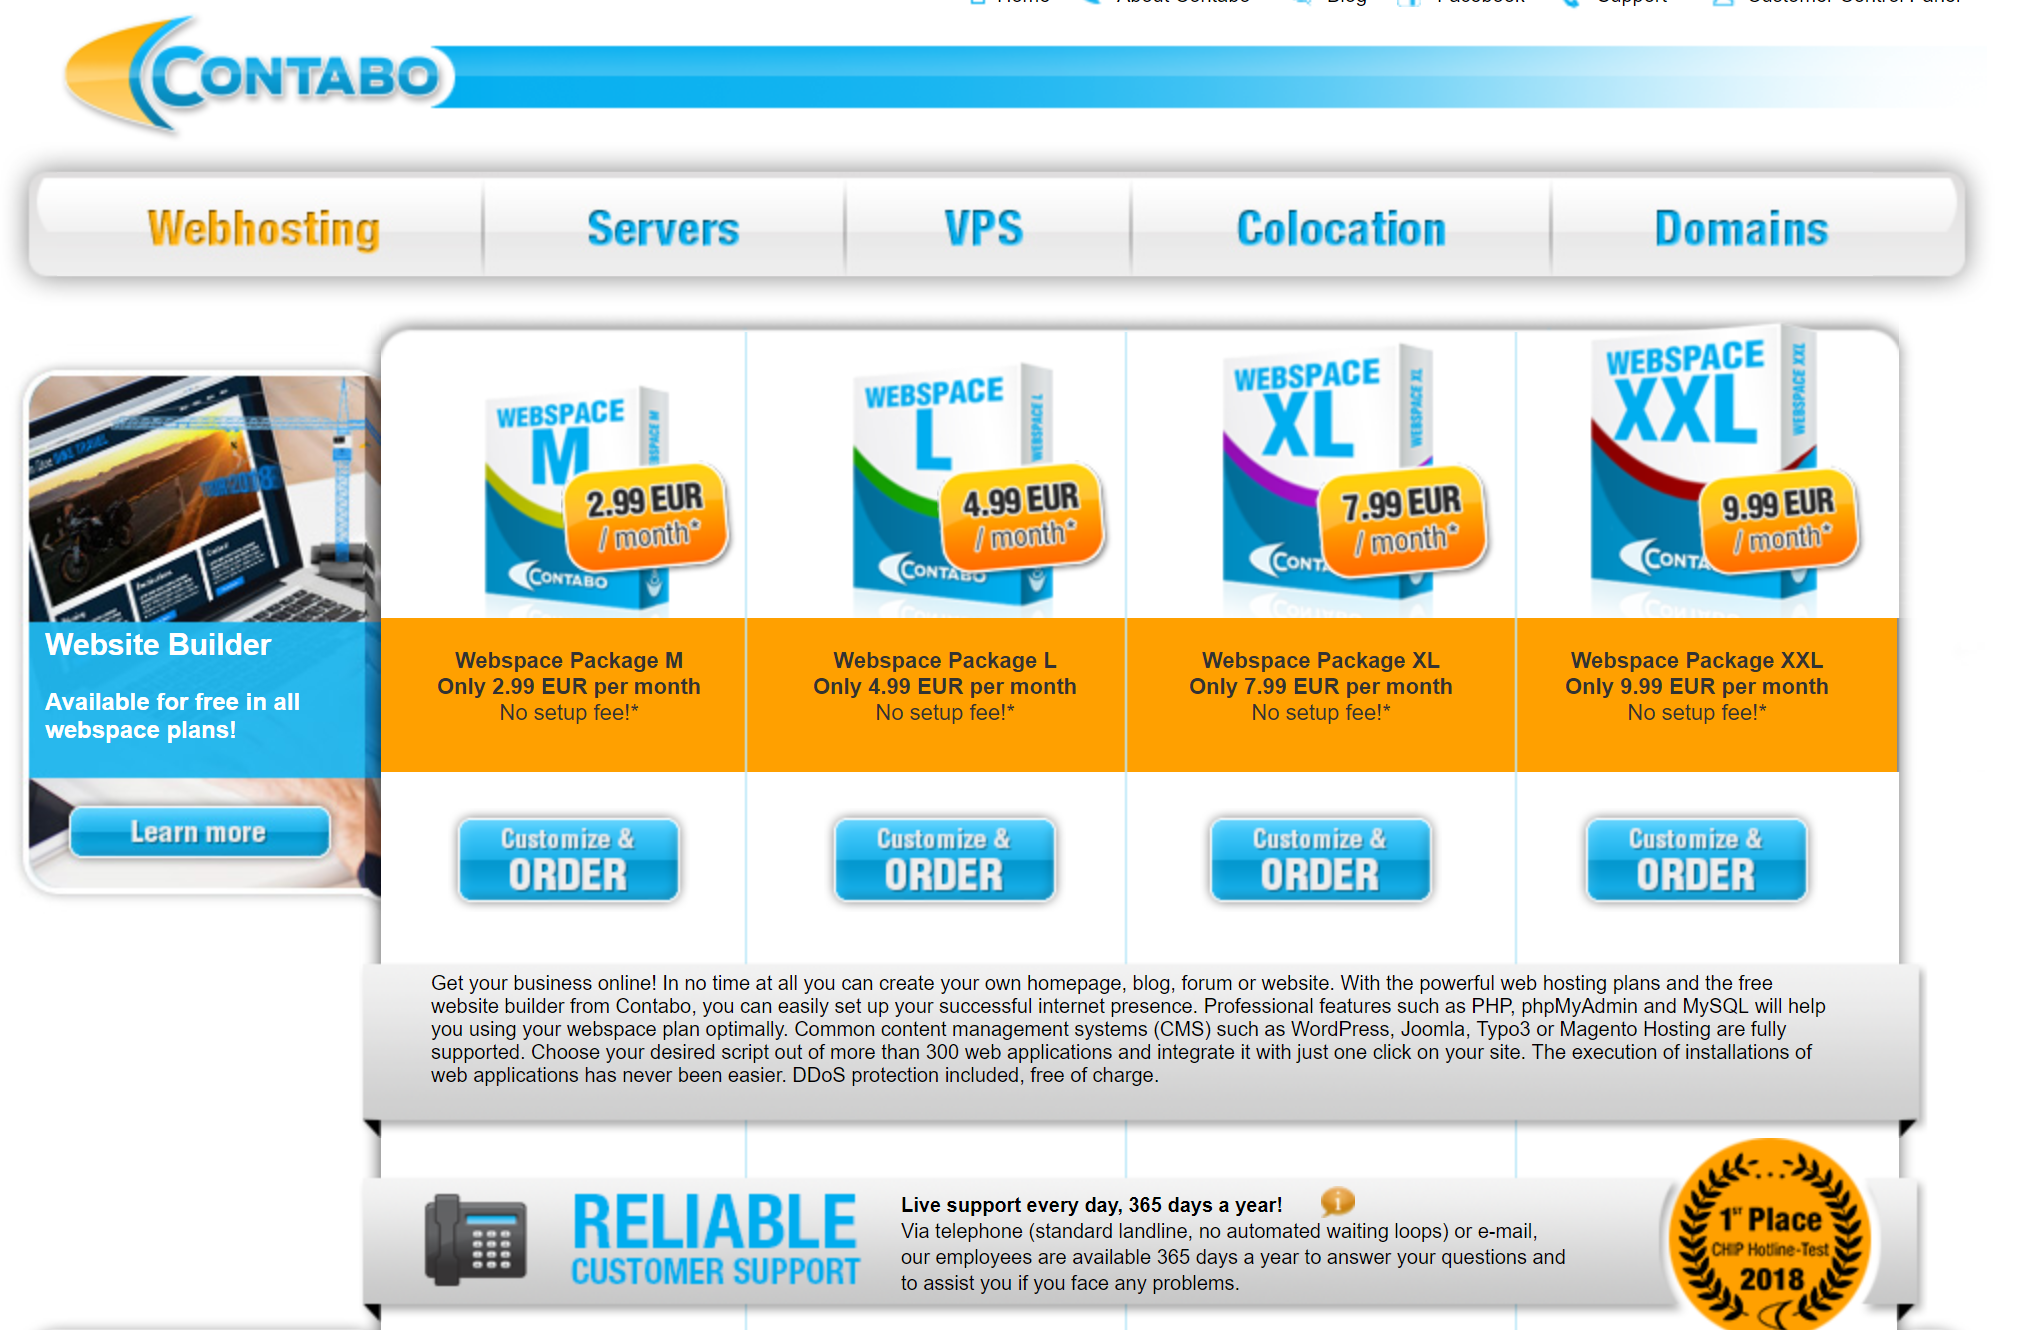 Contabo Hosting offers